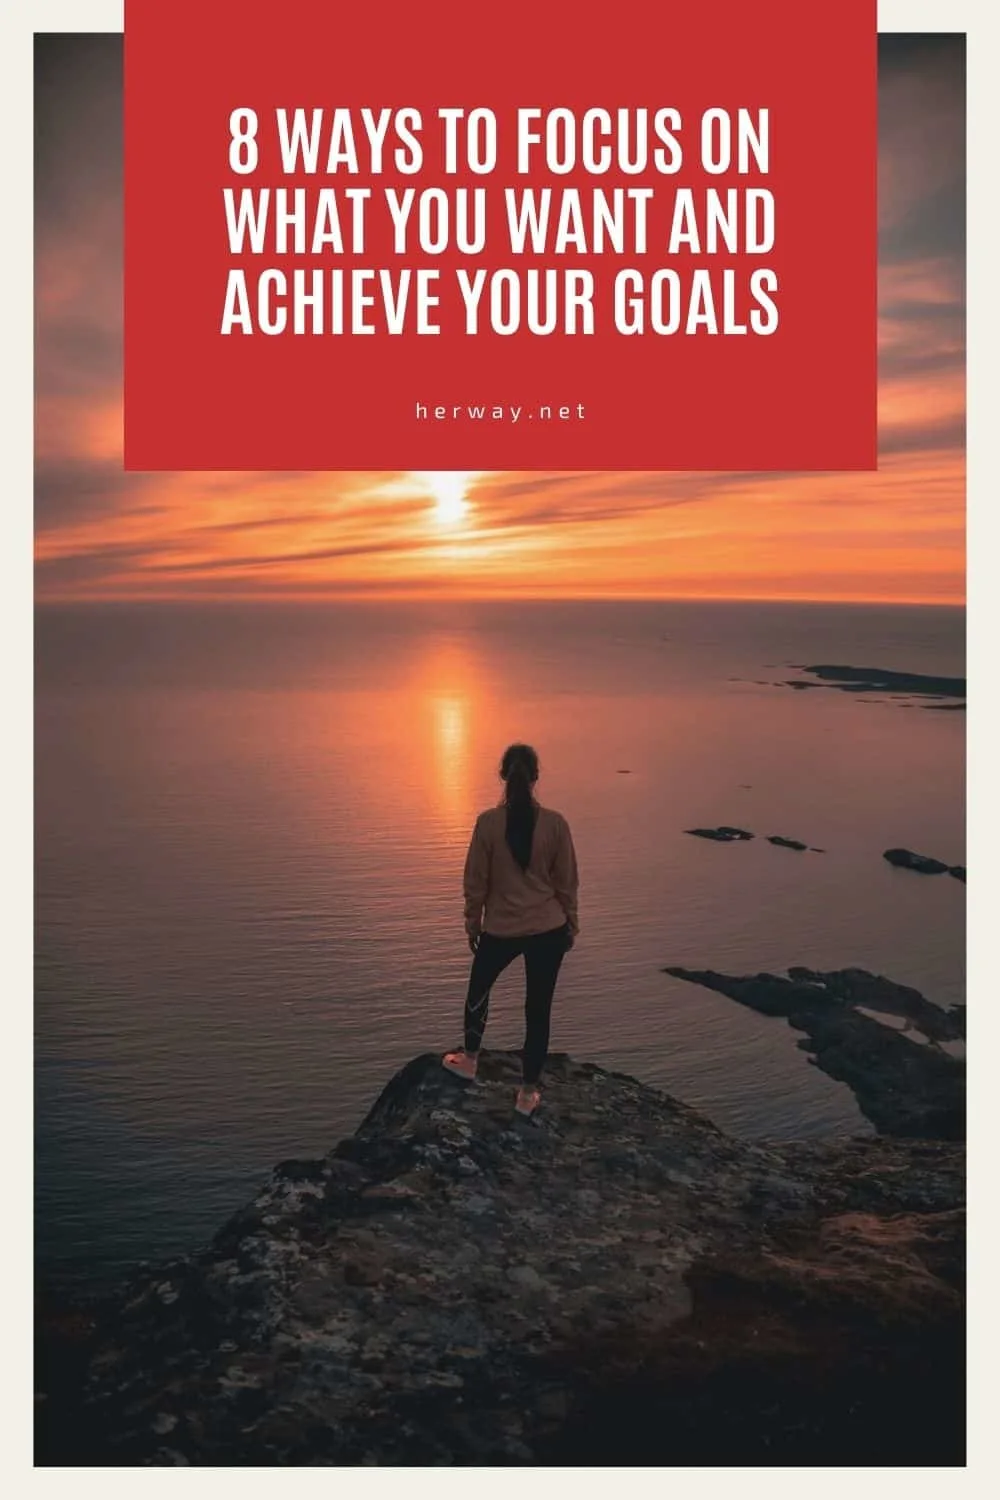 8 Ways To Focus On What You Want And Achieve Your Goals